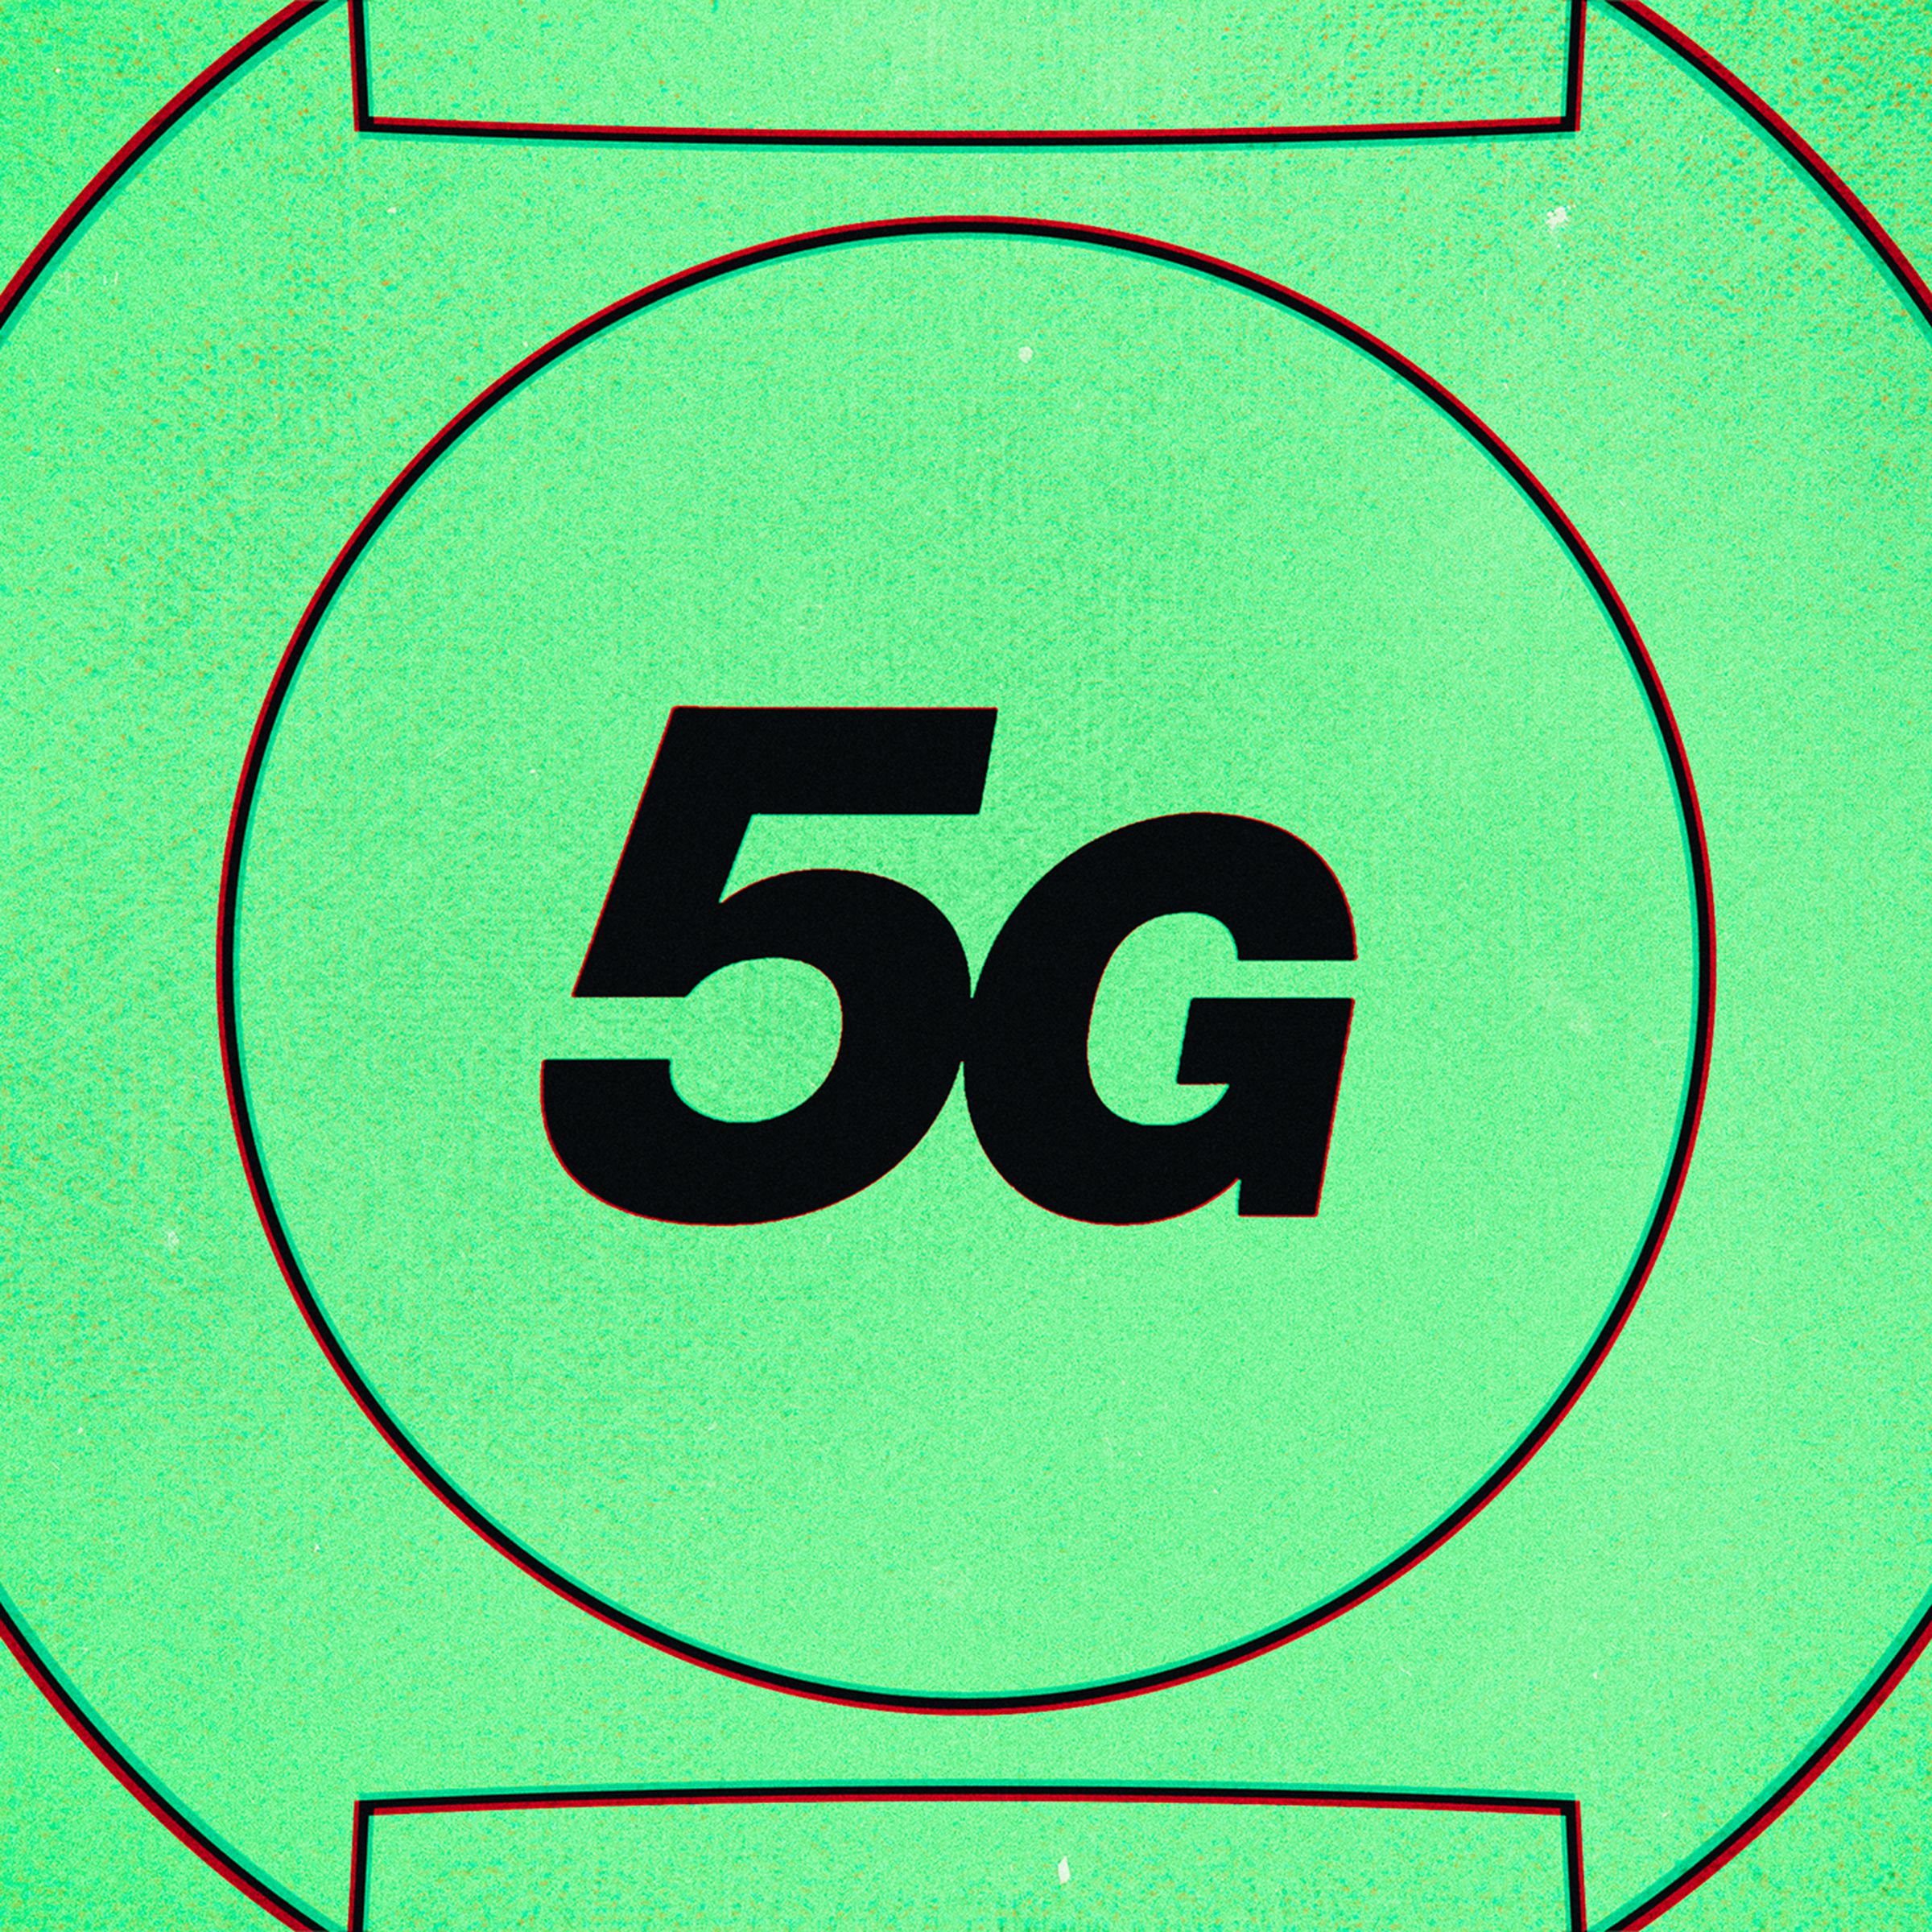 The text “5G” on a green background.